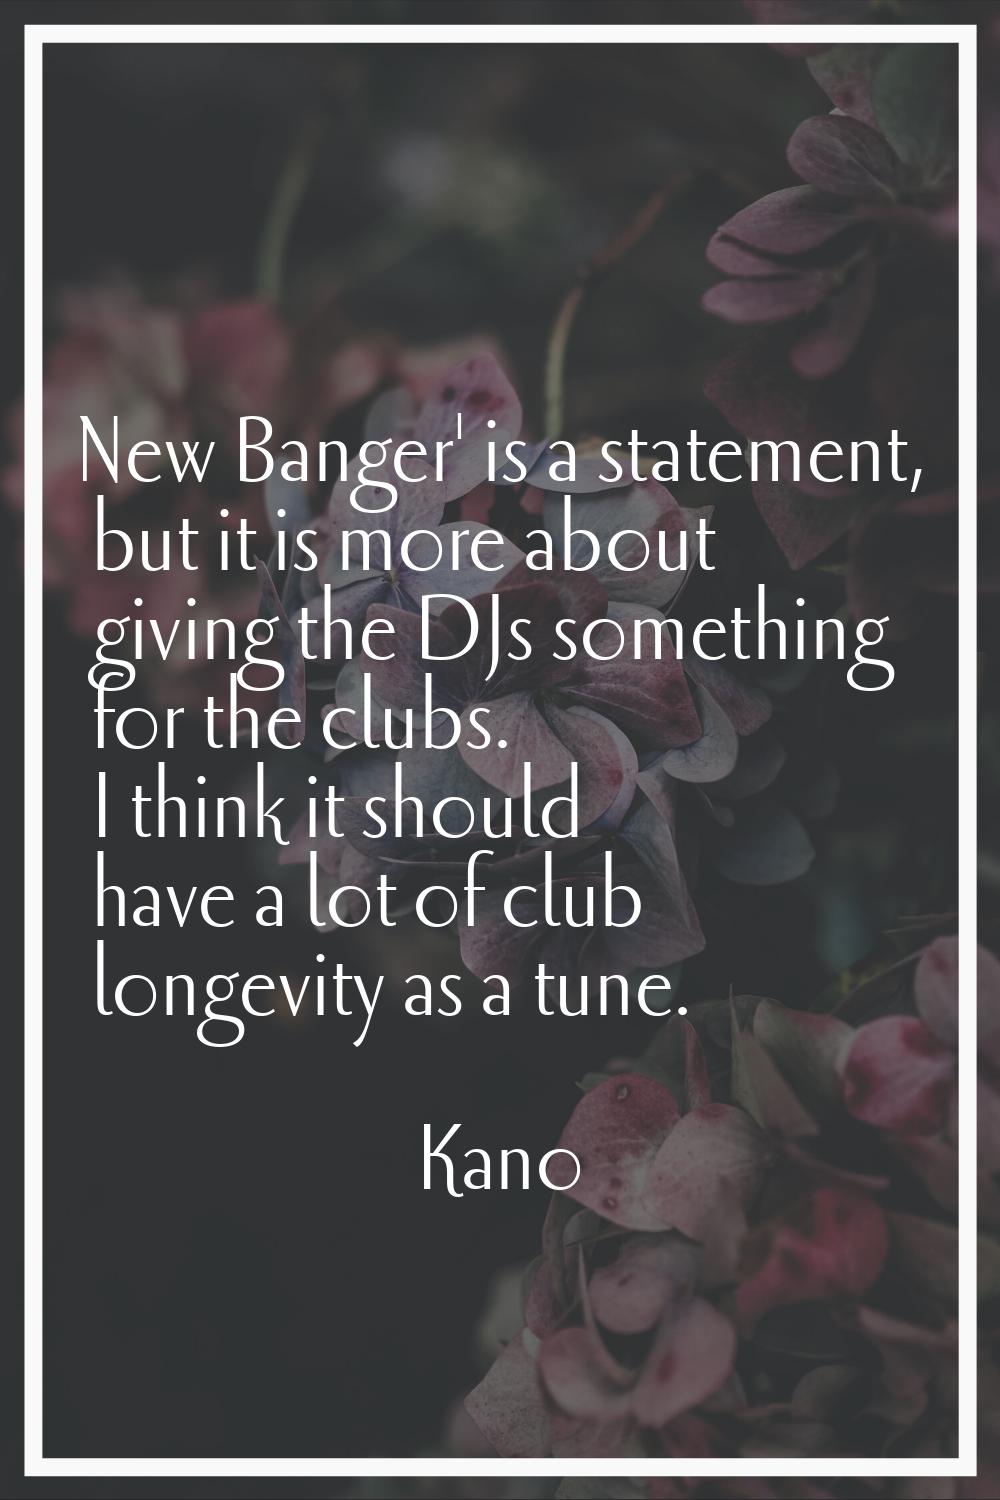 New Banger' is a statement, but it is more about giving the DJs something for the clubs. I think it